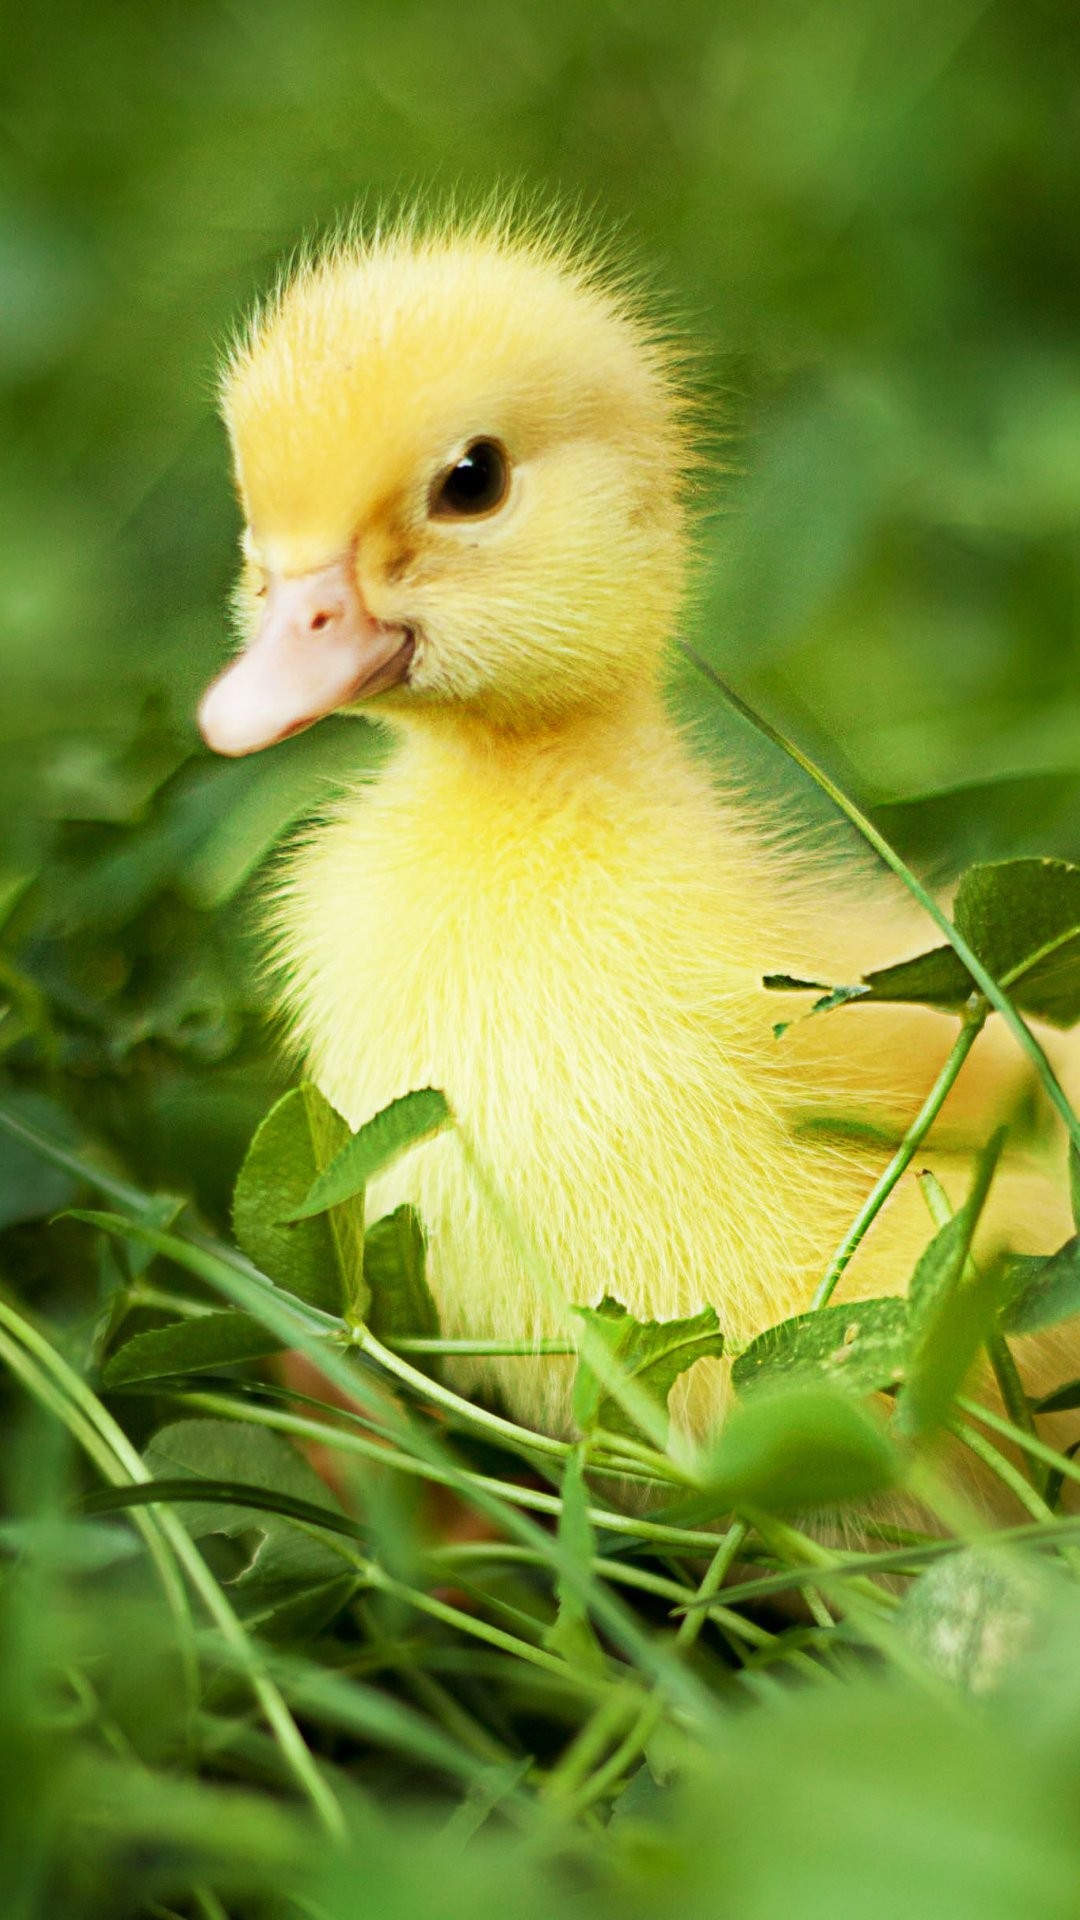 1080x1920 Duckling iPhone 6 Plus Wallpaper 35828 - Animals iPhone 6 Plus Wallpapers -  duckling iphone 6 plus wallpaper: Will you try these bird iphone 6 plus ...